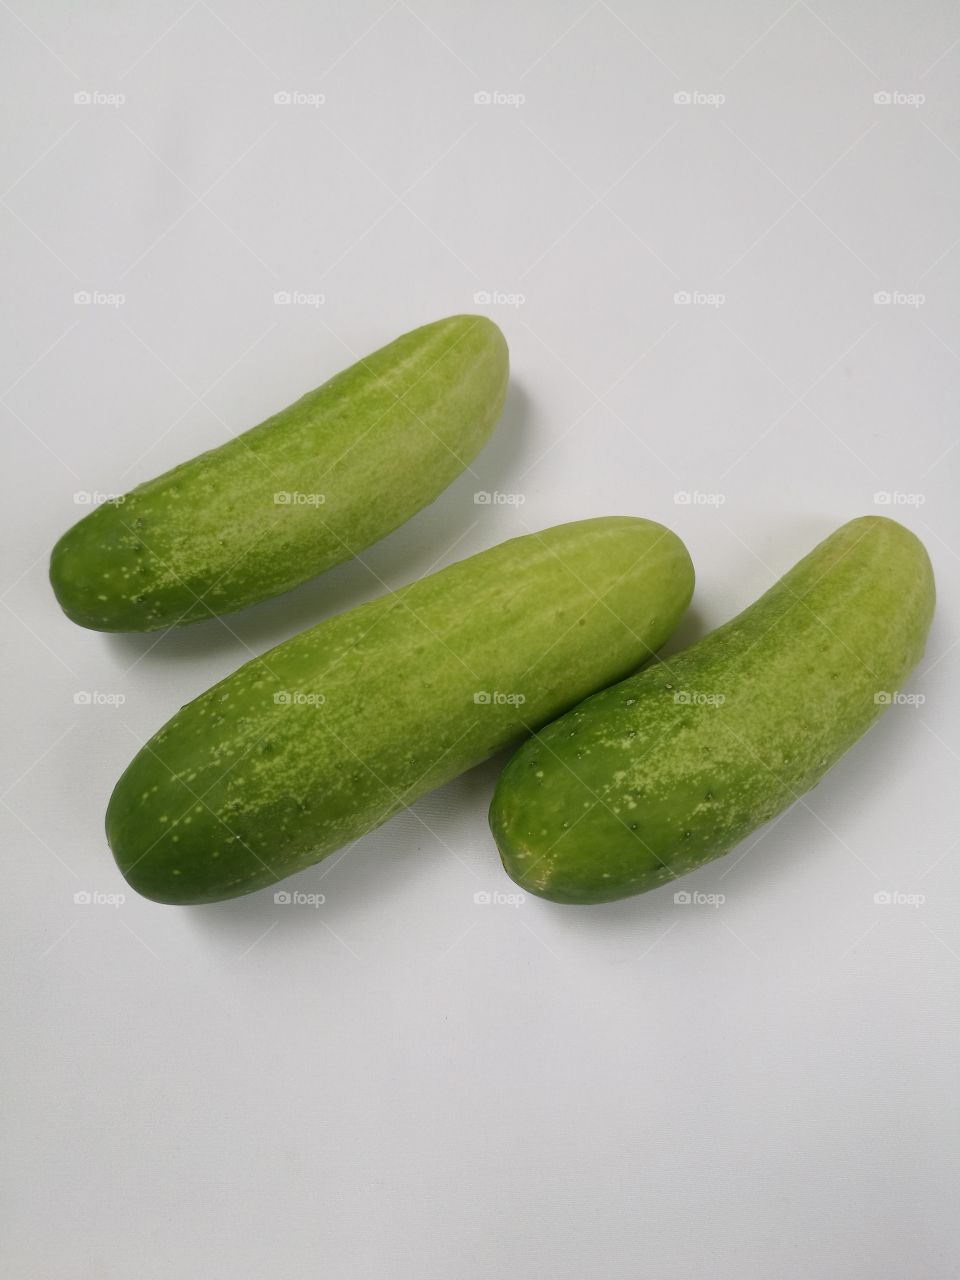 Closeup of cucumbers isolated on white background.